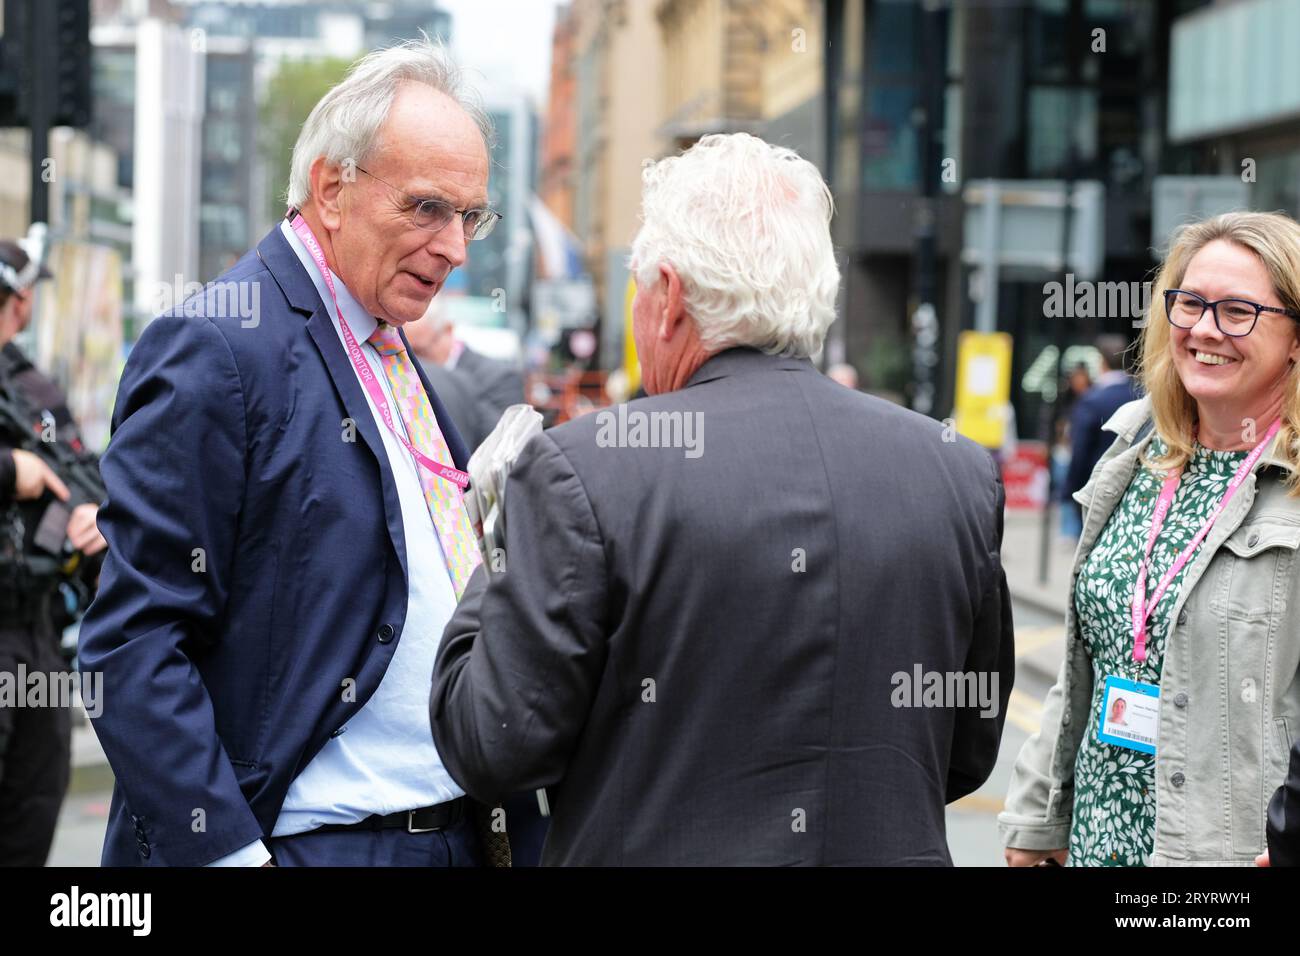 Manchester, UK - Monday 2nd October 2023 – Peter Bone MP for Wellingborough stops to chat at the Conservative Party Conference CPC23 - Photo Steven May / Alamy Live News Stock Photo